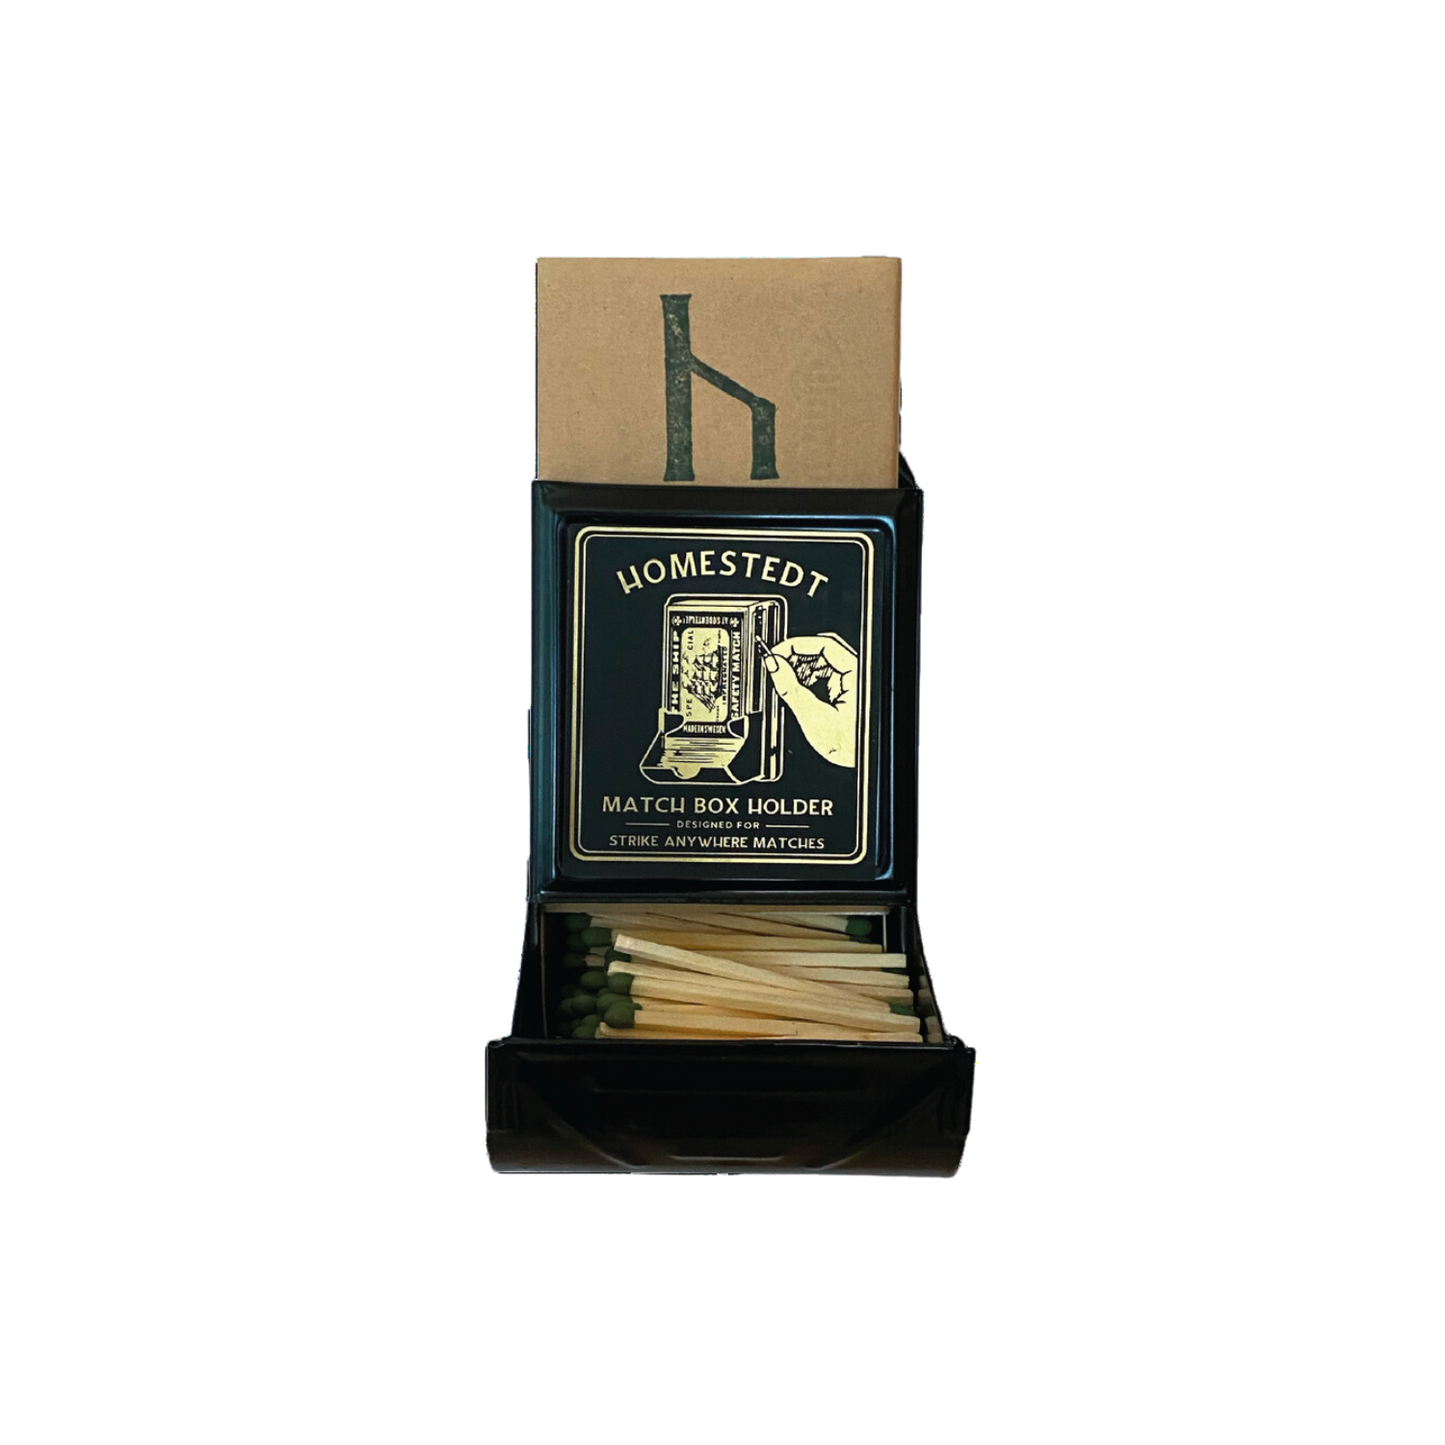 Homestedt Wall Mounted Match Box Holder